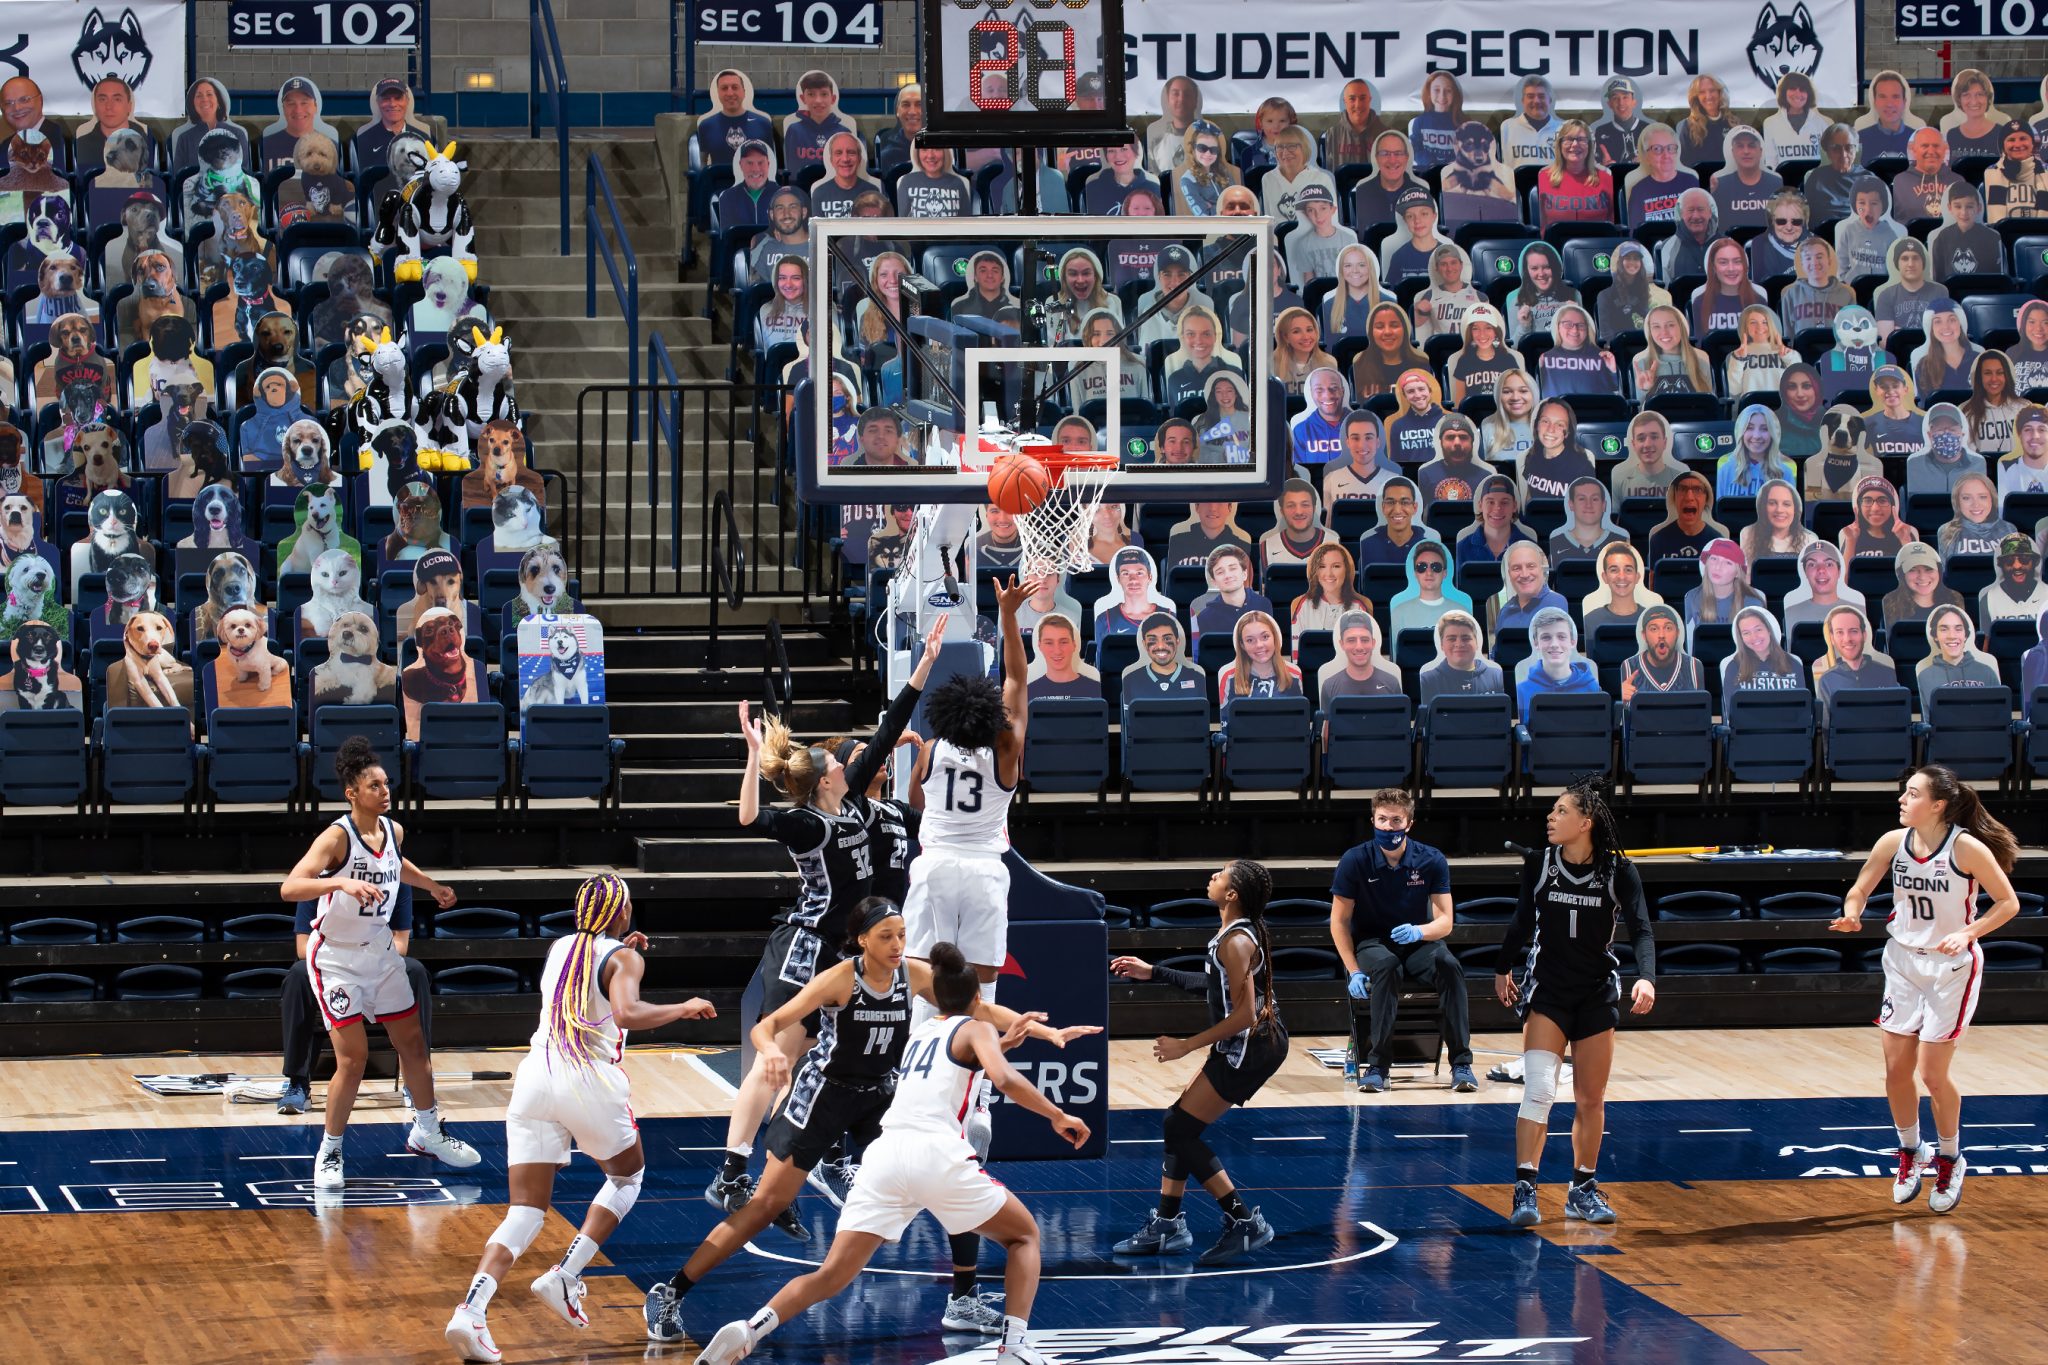 UConn women's basketball team playing during COVID-19 pandemic with cardboard cutouts of people and animals in stands